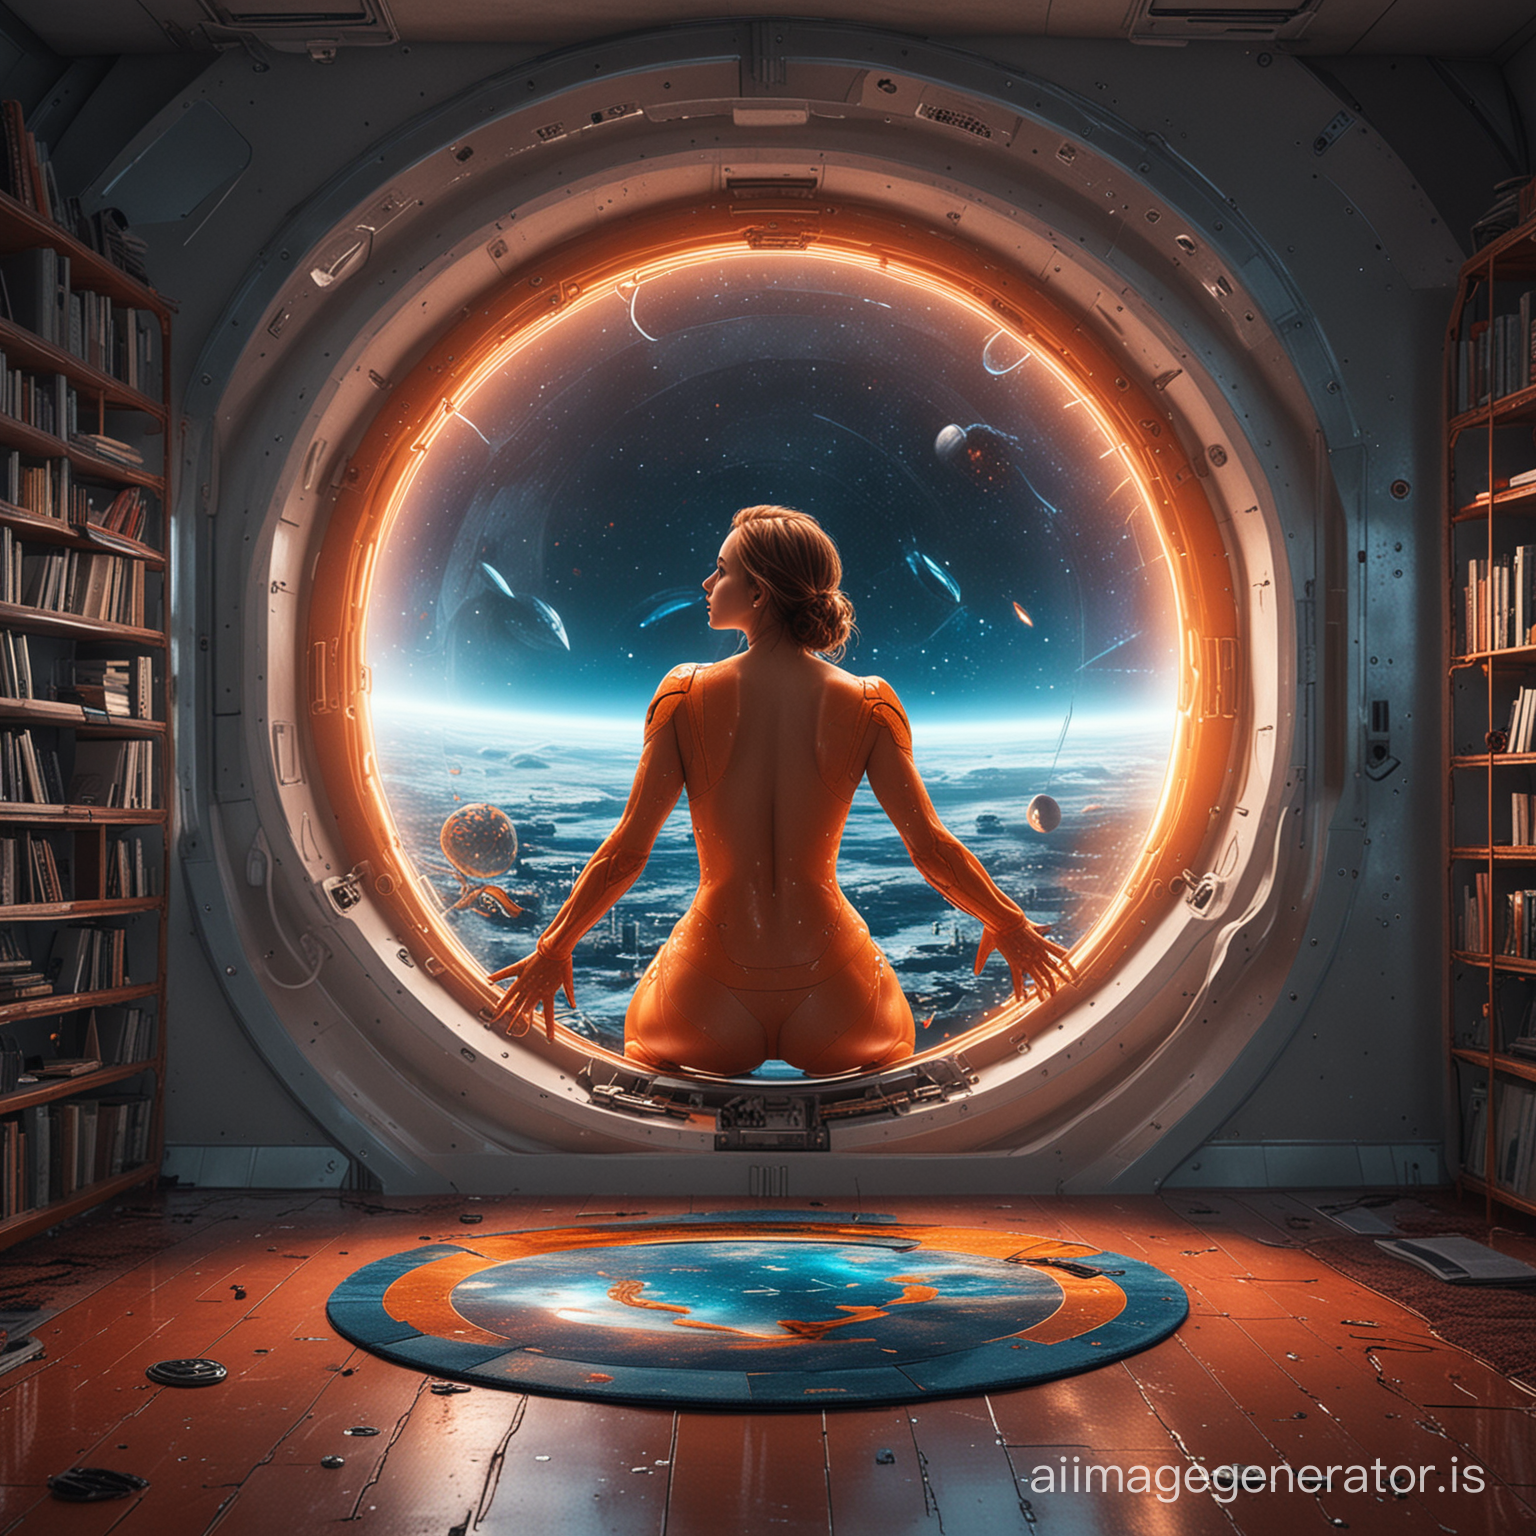 From near side, naked jennifer lawrence standing by window. Sci-fi design cozy 3D metal capsule apartment in a spacestation. Red planet. Sun. Sci-fi space 3D feeling. Bookshelf. Screens. Stained-glass blue round window with reflection and Orange LED. Colorful carpet. Full body side view. Naked jennifer lawrencefighting a giant octopud. Ultra realistic. Wide angle.